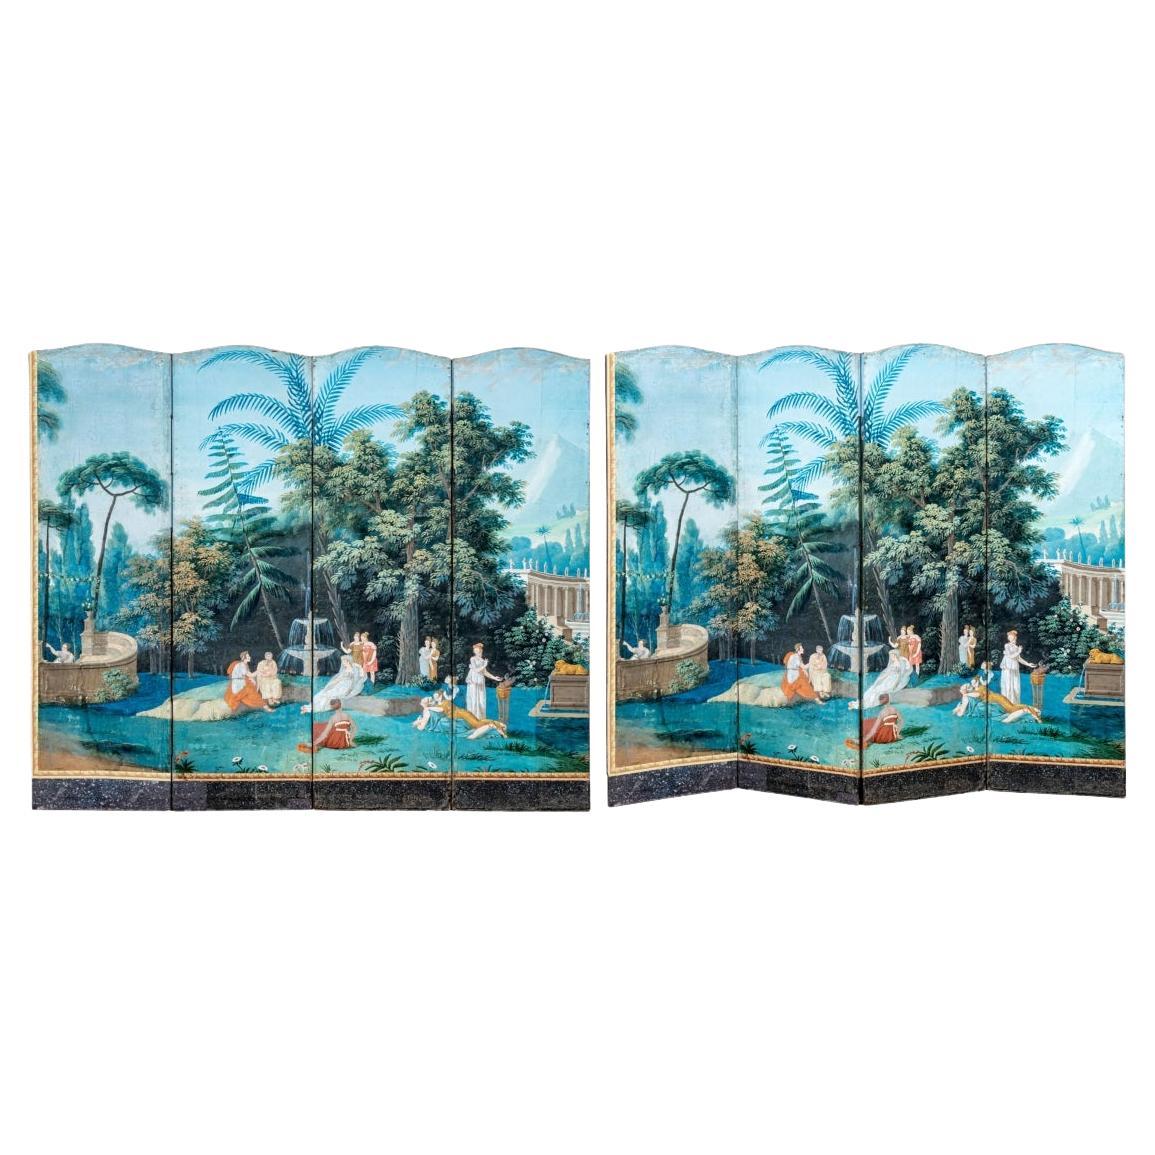 Extraordinary 19th Century 8 Panel Painted Wallpaper Screen, "Italian Landscape" For Sale